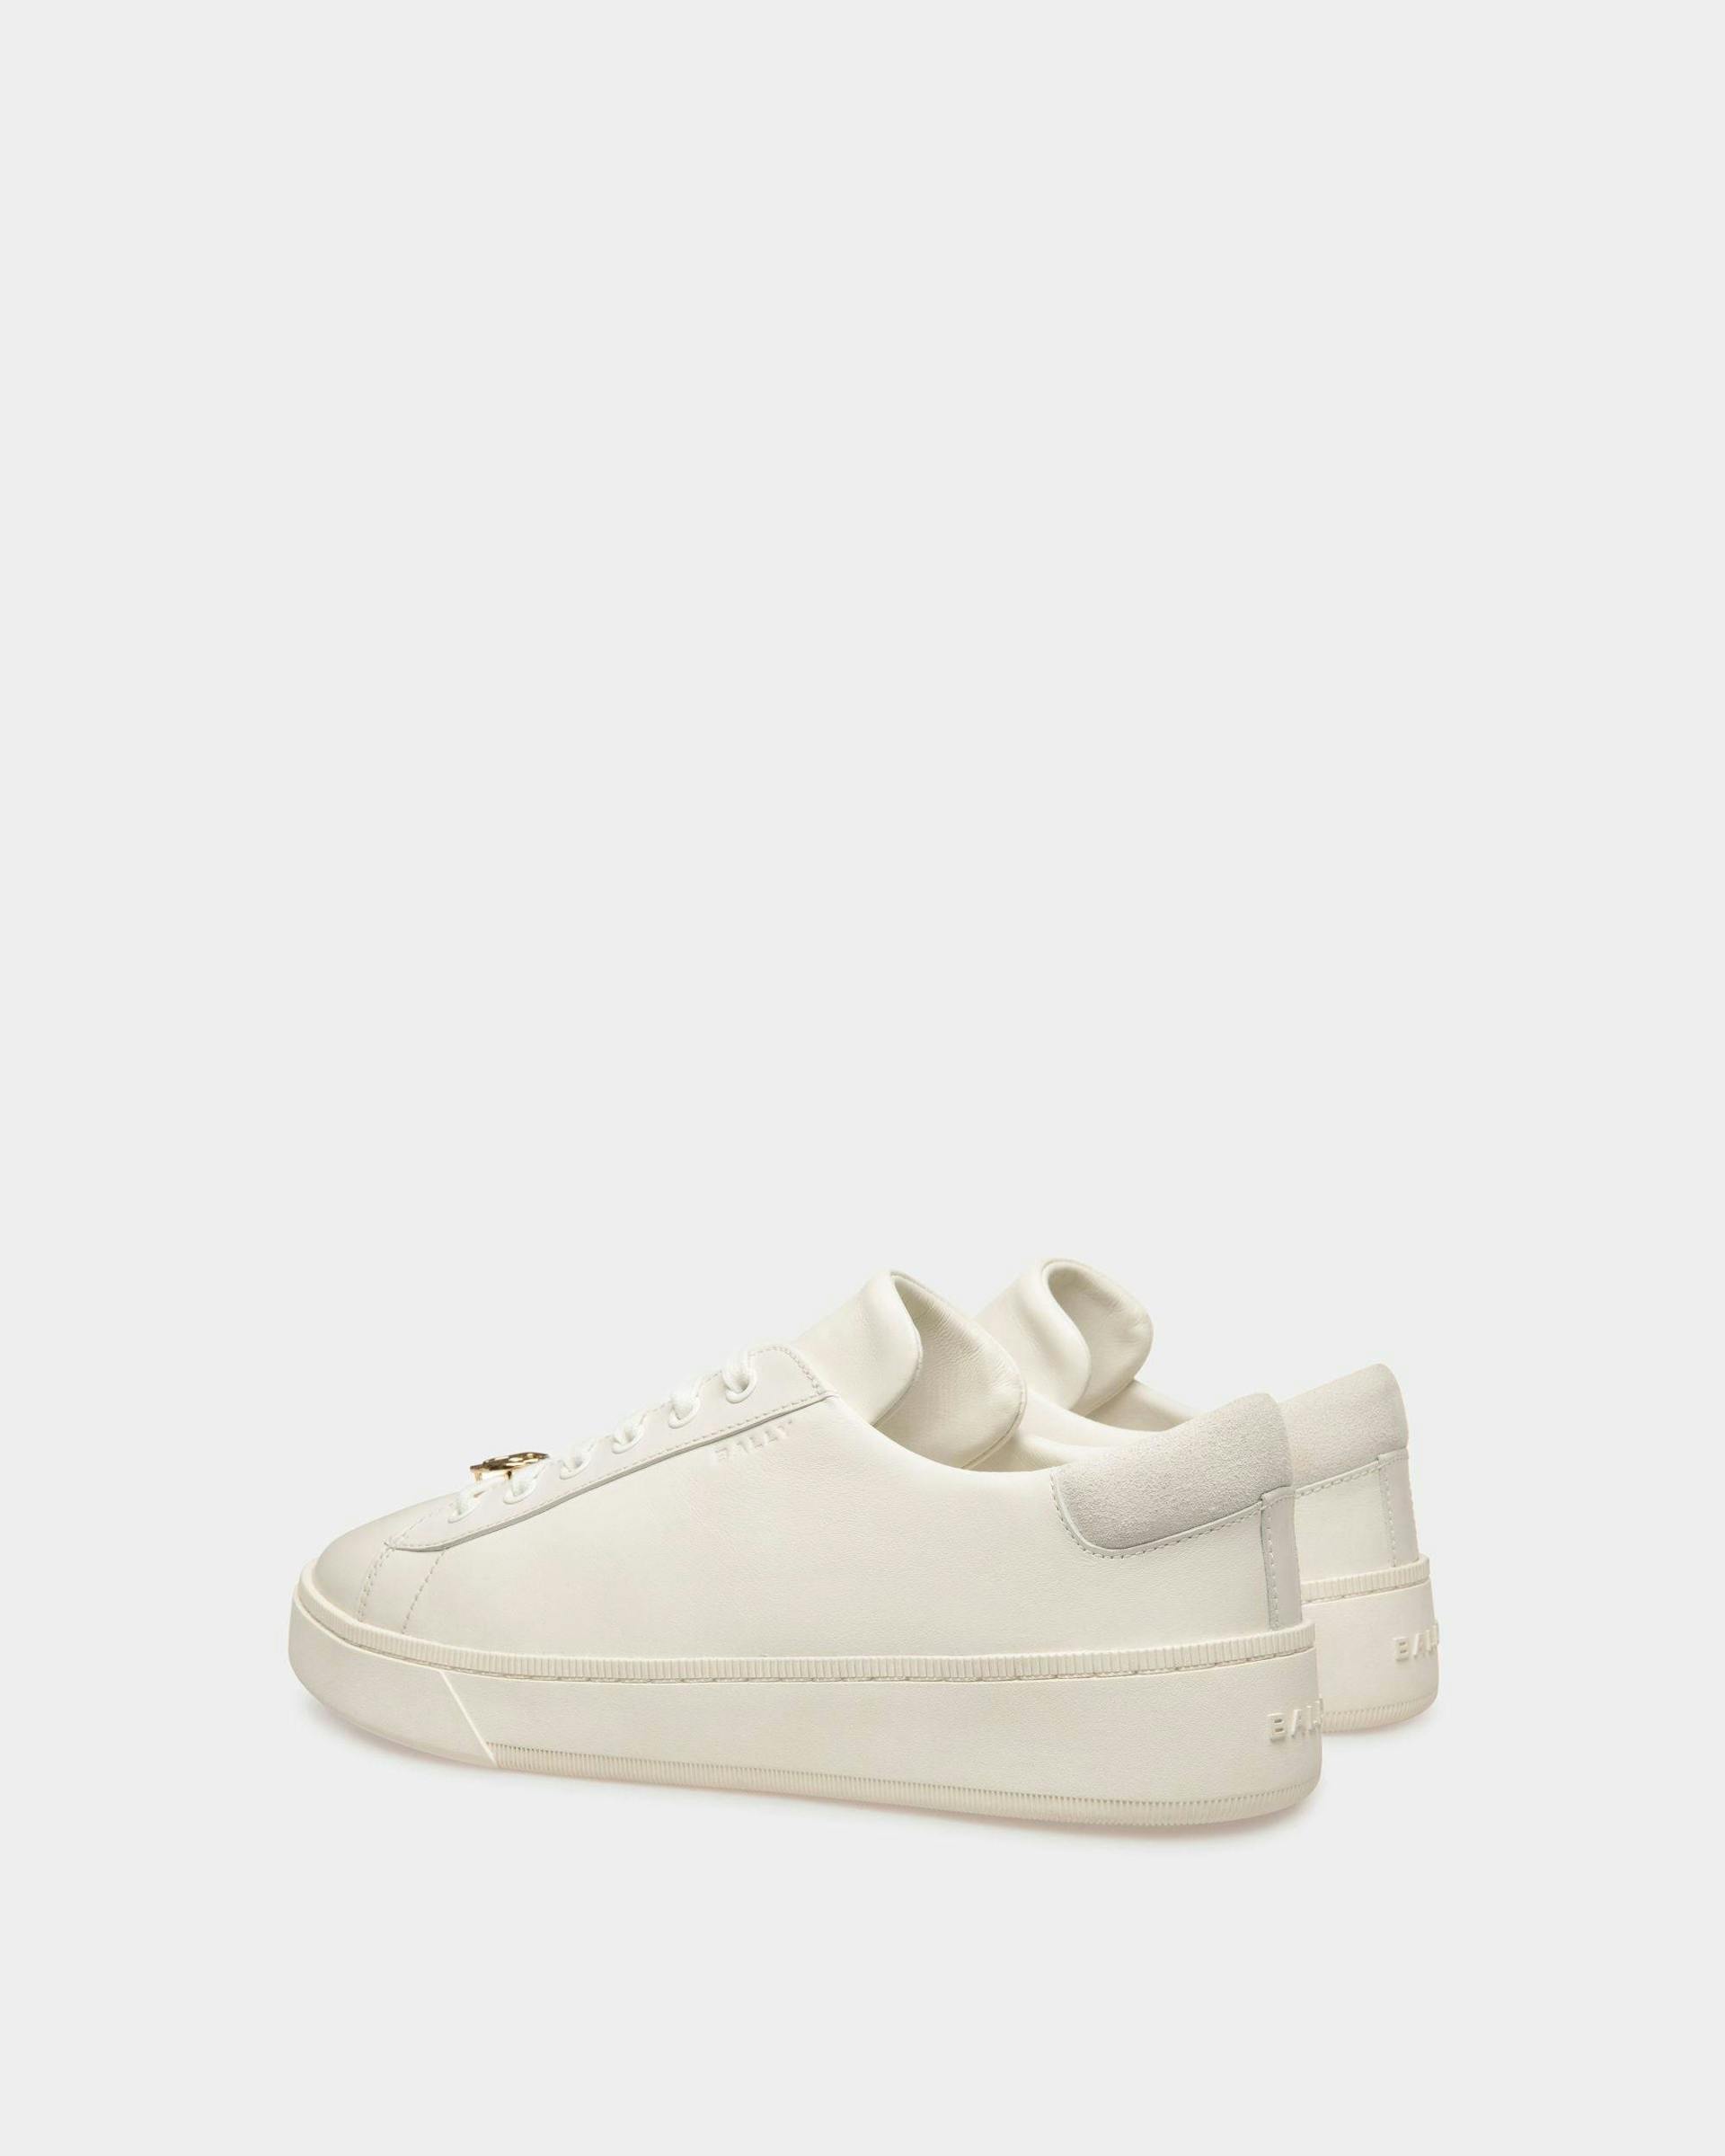 Raise Sneakers In White Leather - Men's - Bally - 05